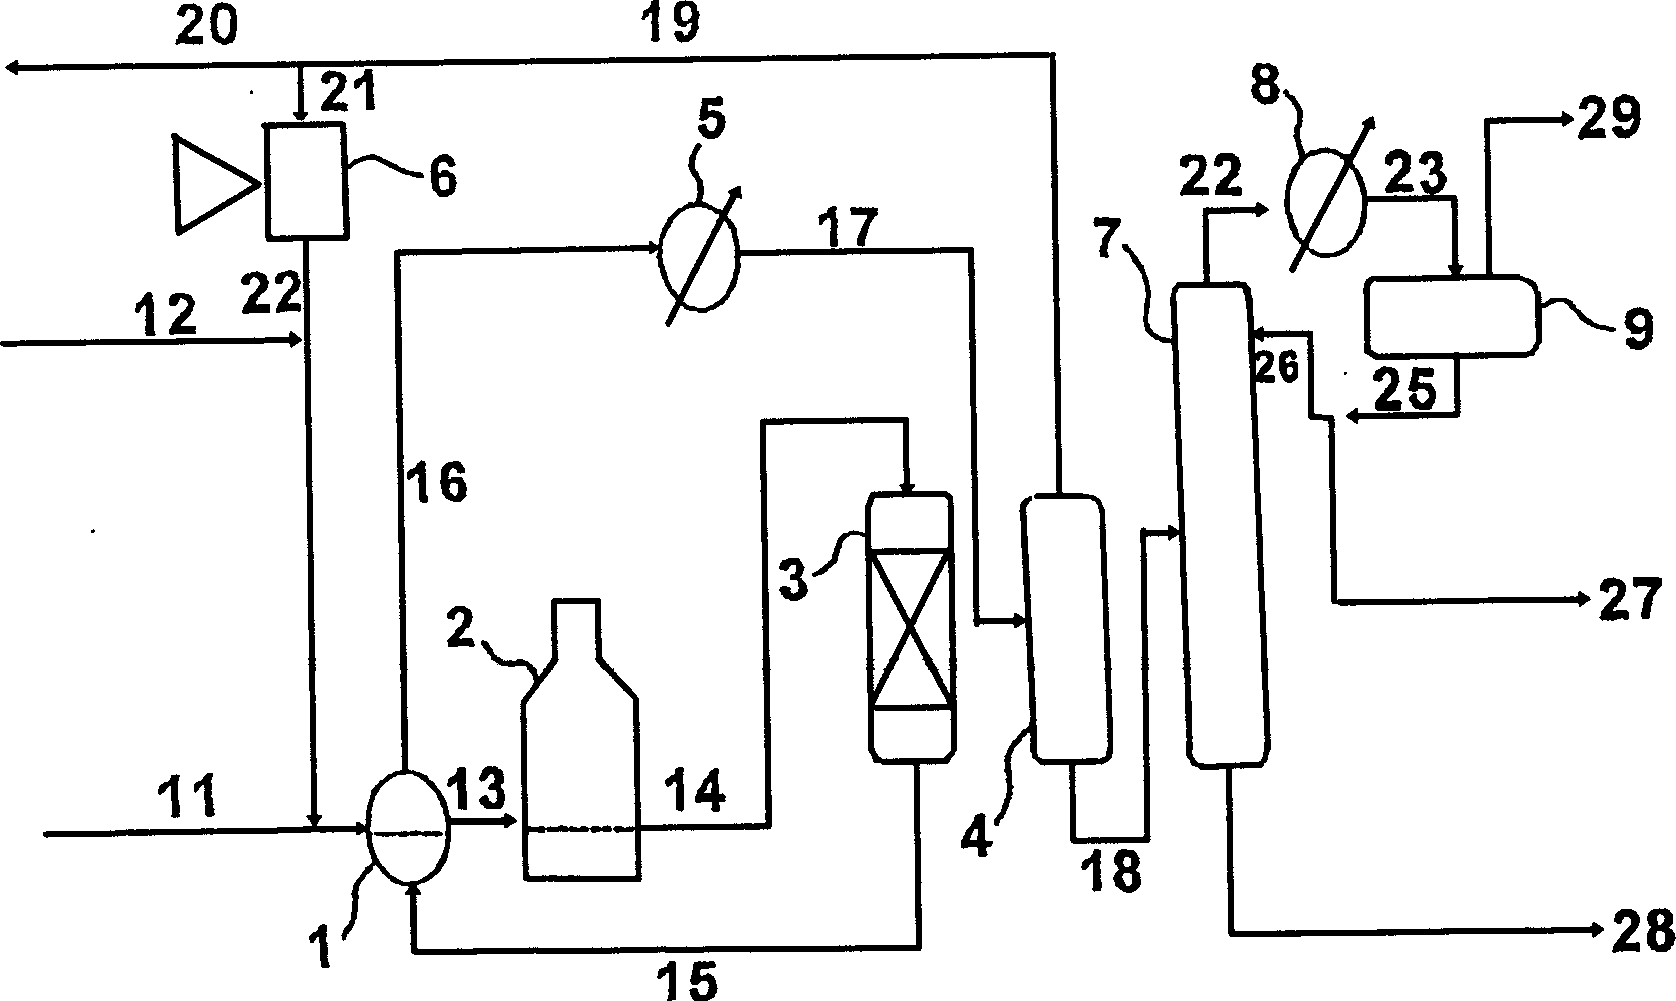 Process for producing aromatic hydrocarbon compounds and liquefied petroleum gas from hydrocarbon feedstock